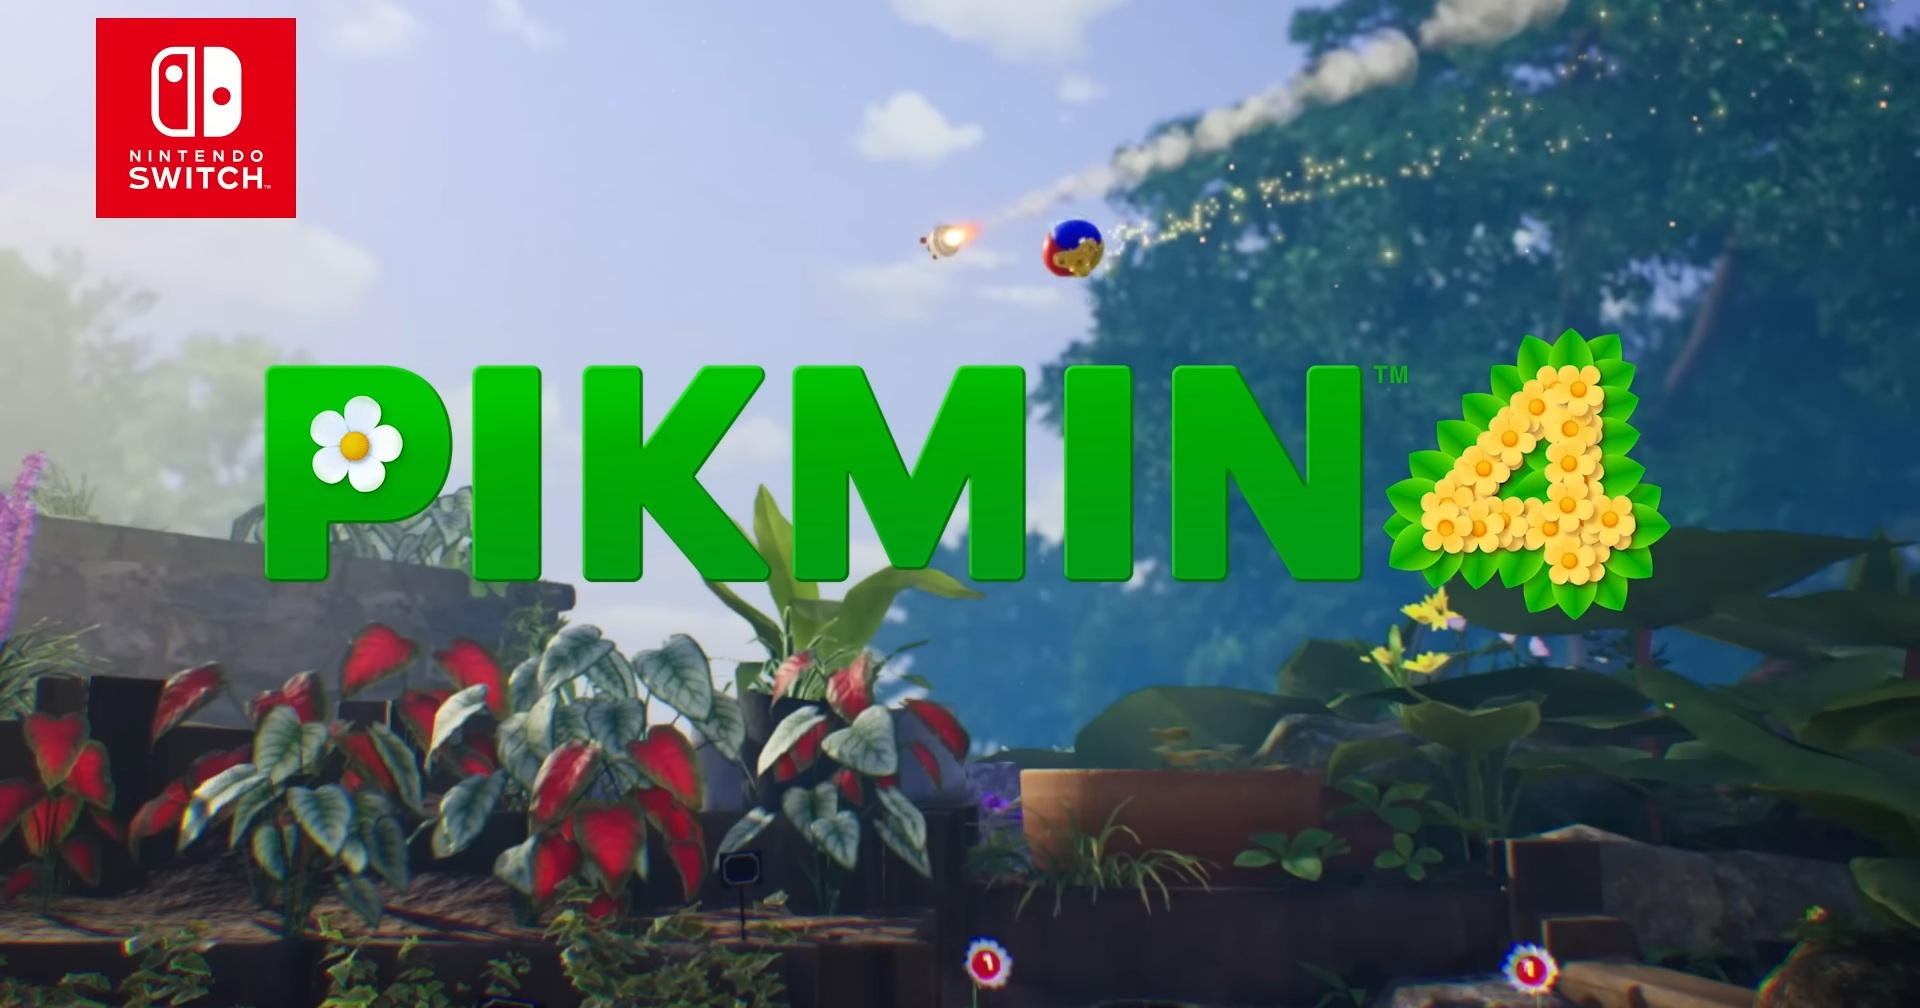 We see a blooming garden with the green logo of Pikmin 4. Above it, a flying capsule is shown. The release date is close.